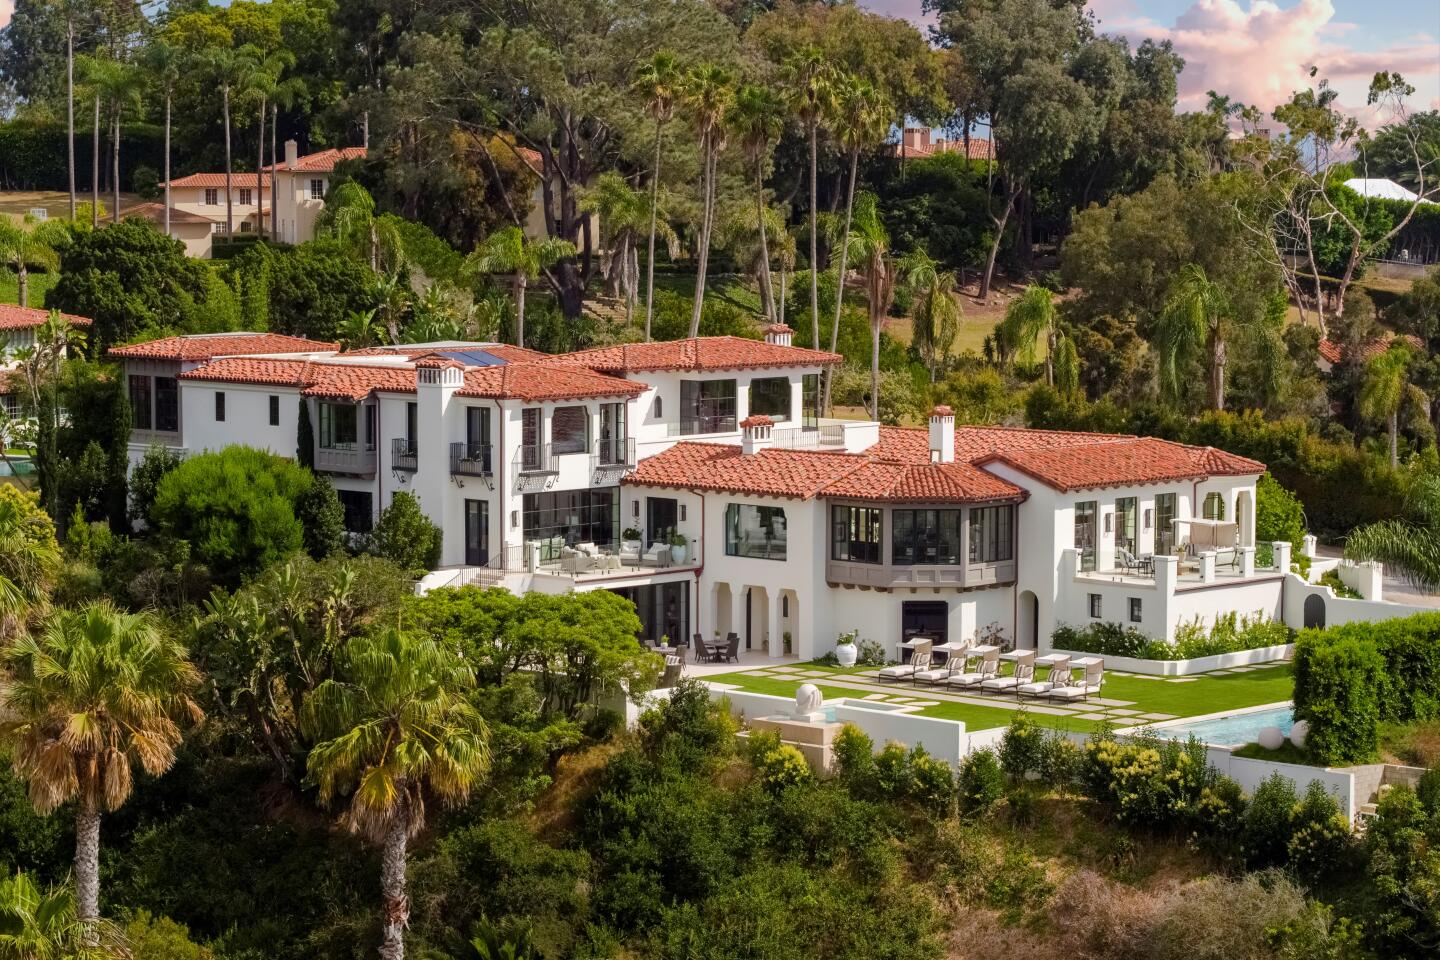 The Top 10 Most Expensive US Home Sales in 2022